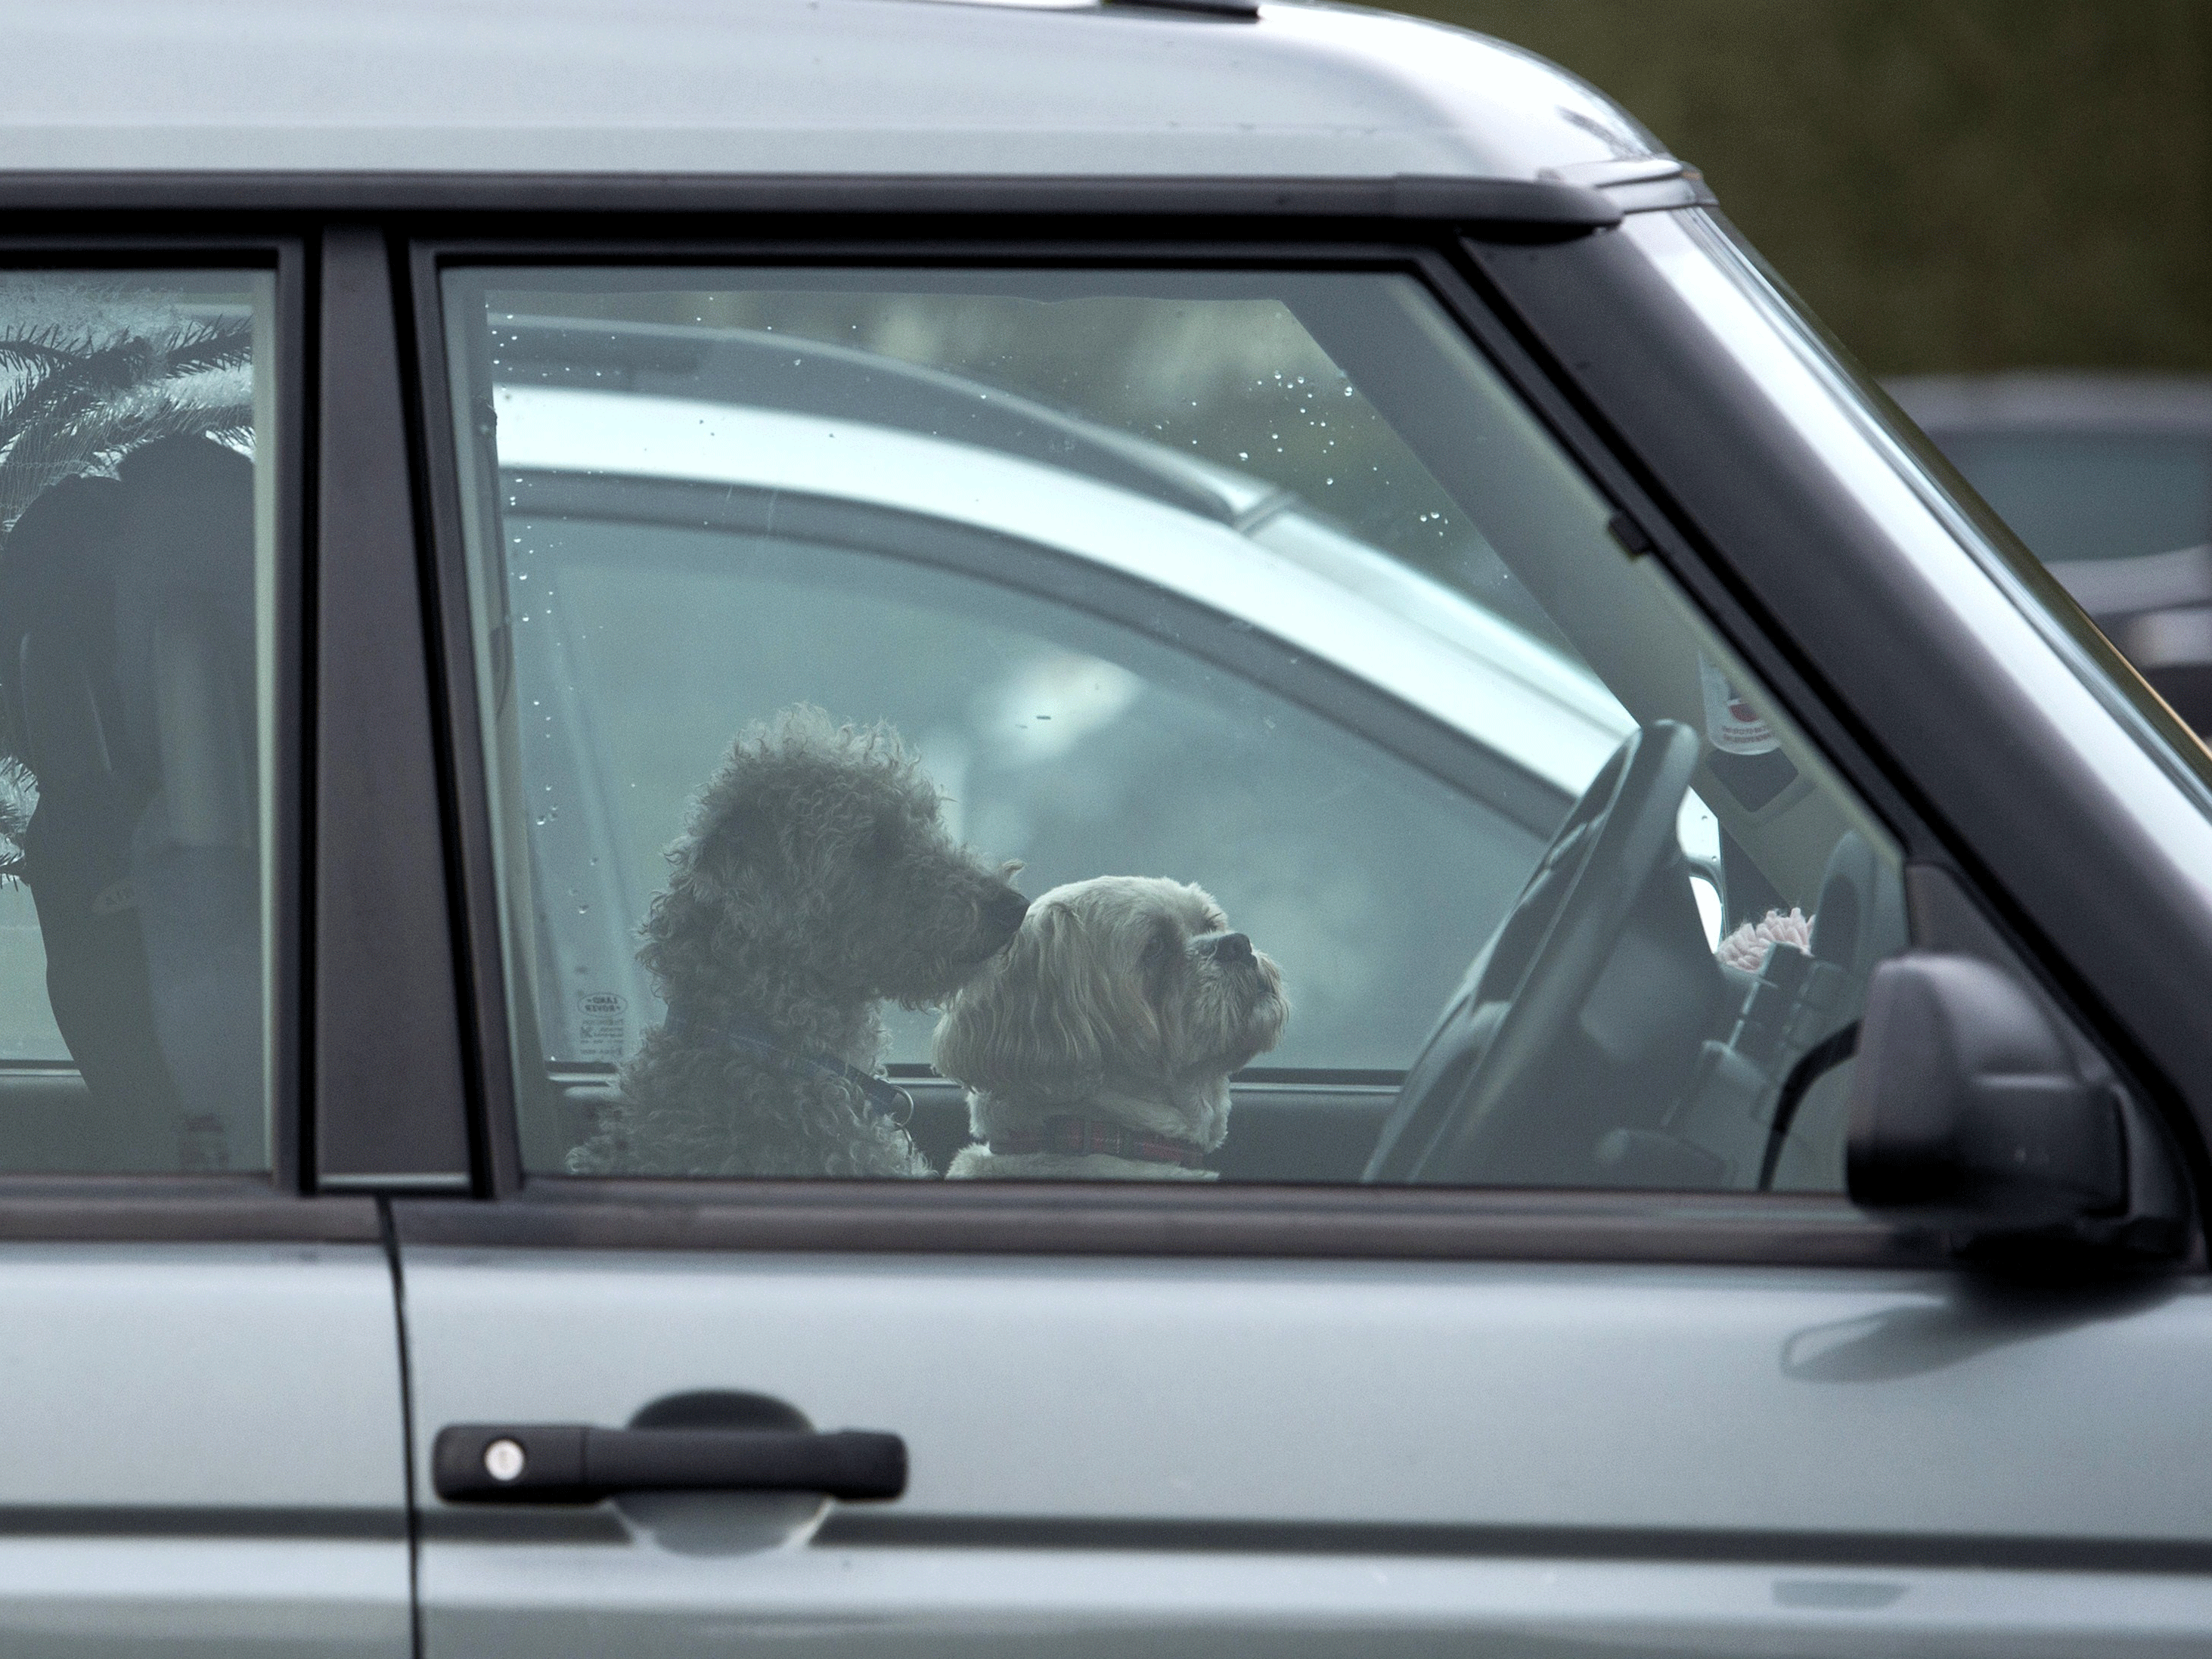 What Should You Do When You See A Dog In A Hot Car The Independent The Independent